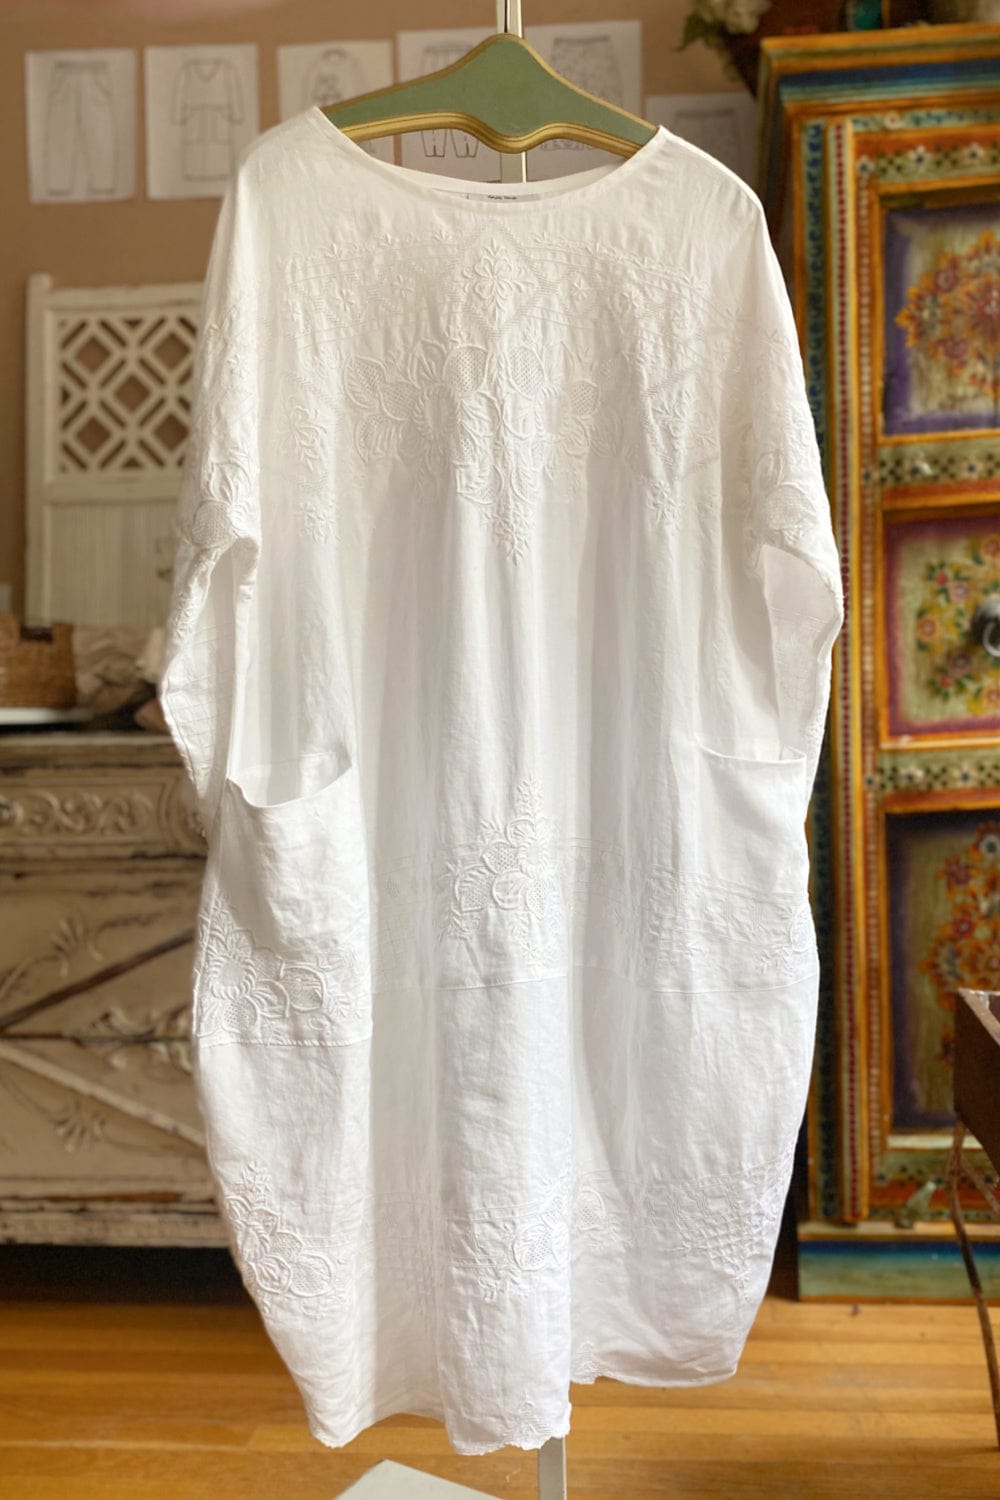 Cotton white bubble shape dress with delicate stitching detail. It has a round neckline and two front pockets and hanging from a vintage hanger.